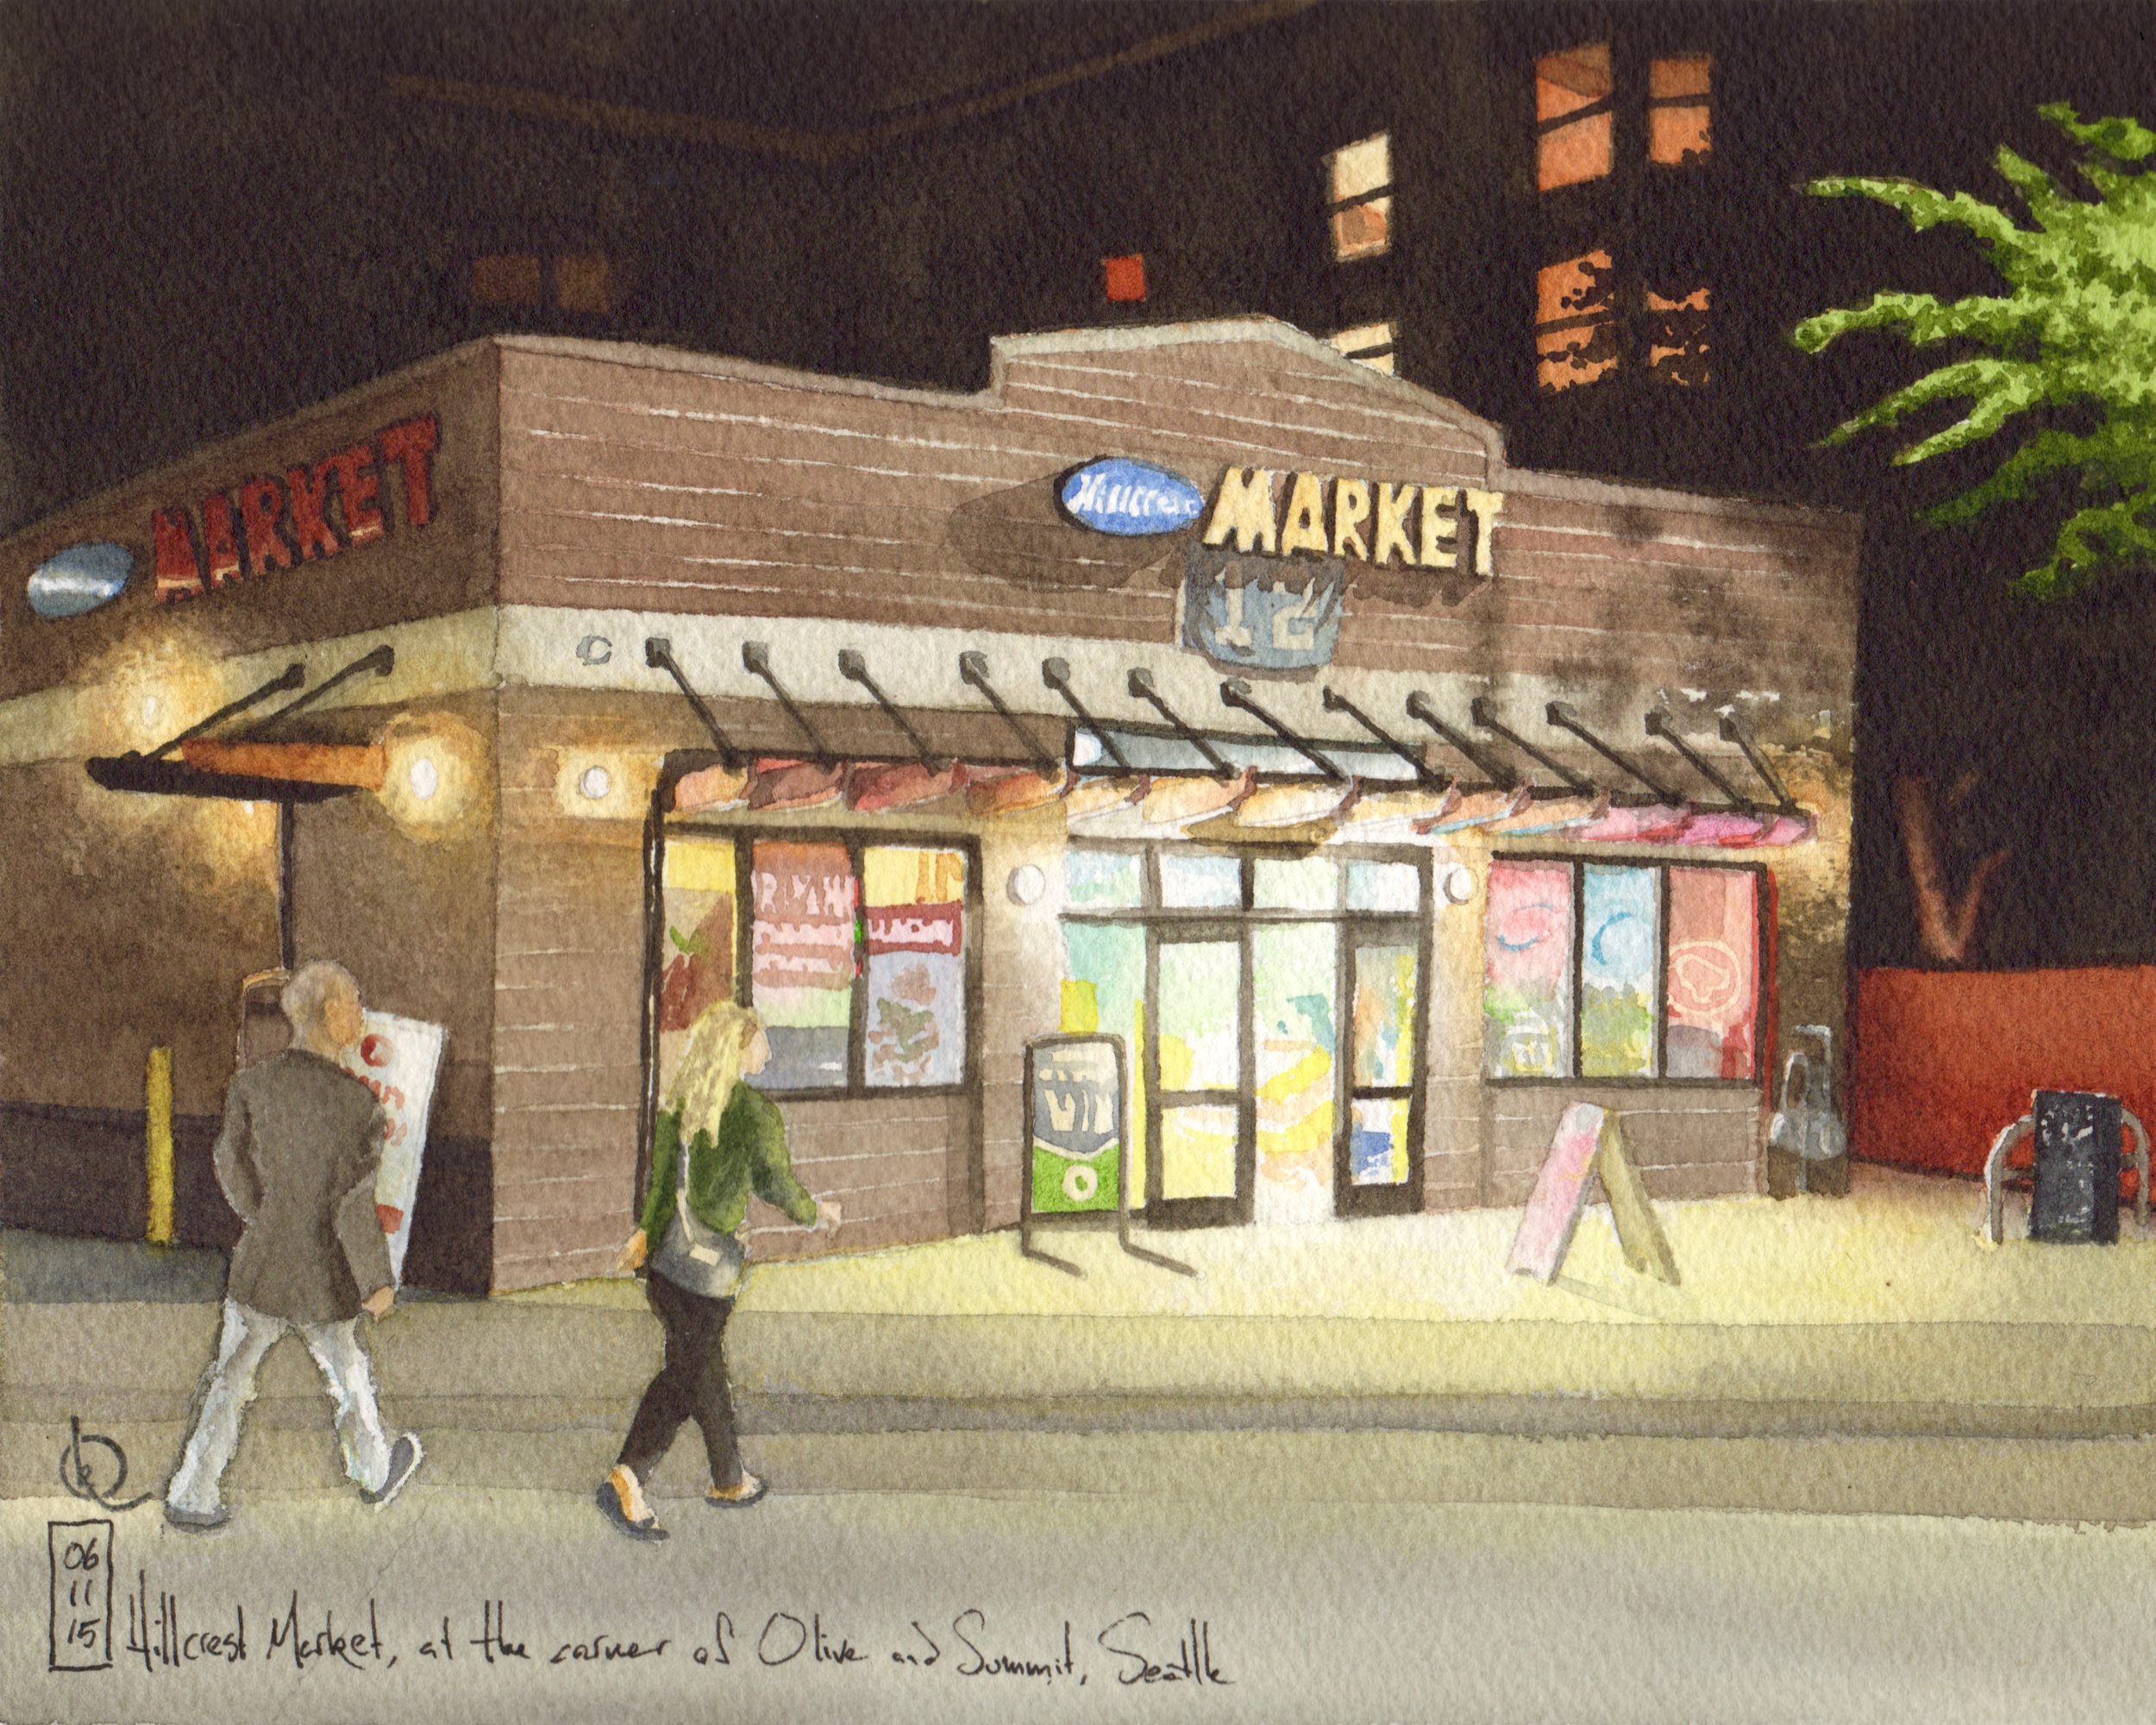 Hillcrest Market, on the corner of Summit and Olive, Seattle